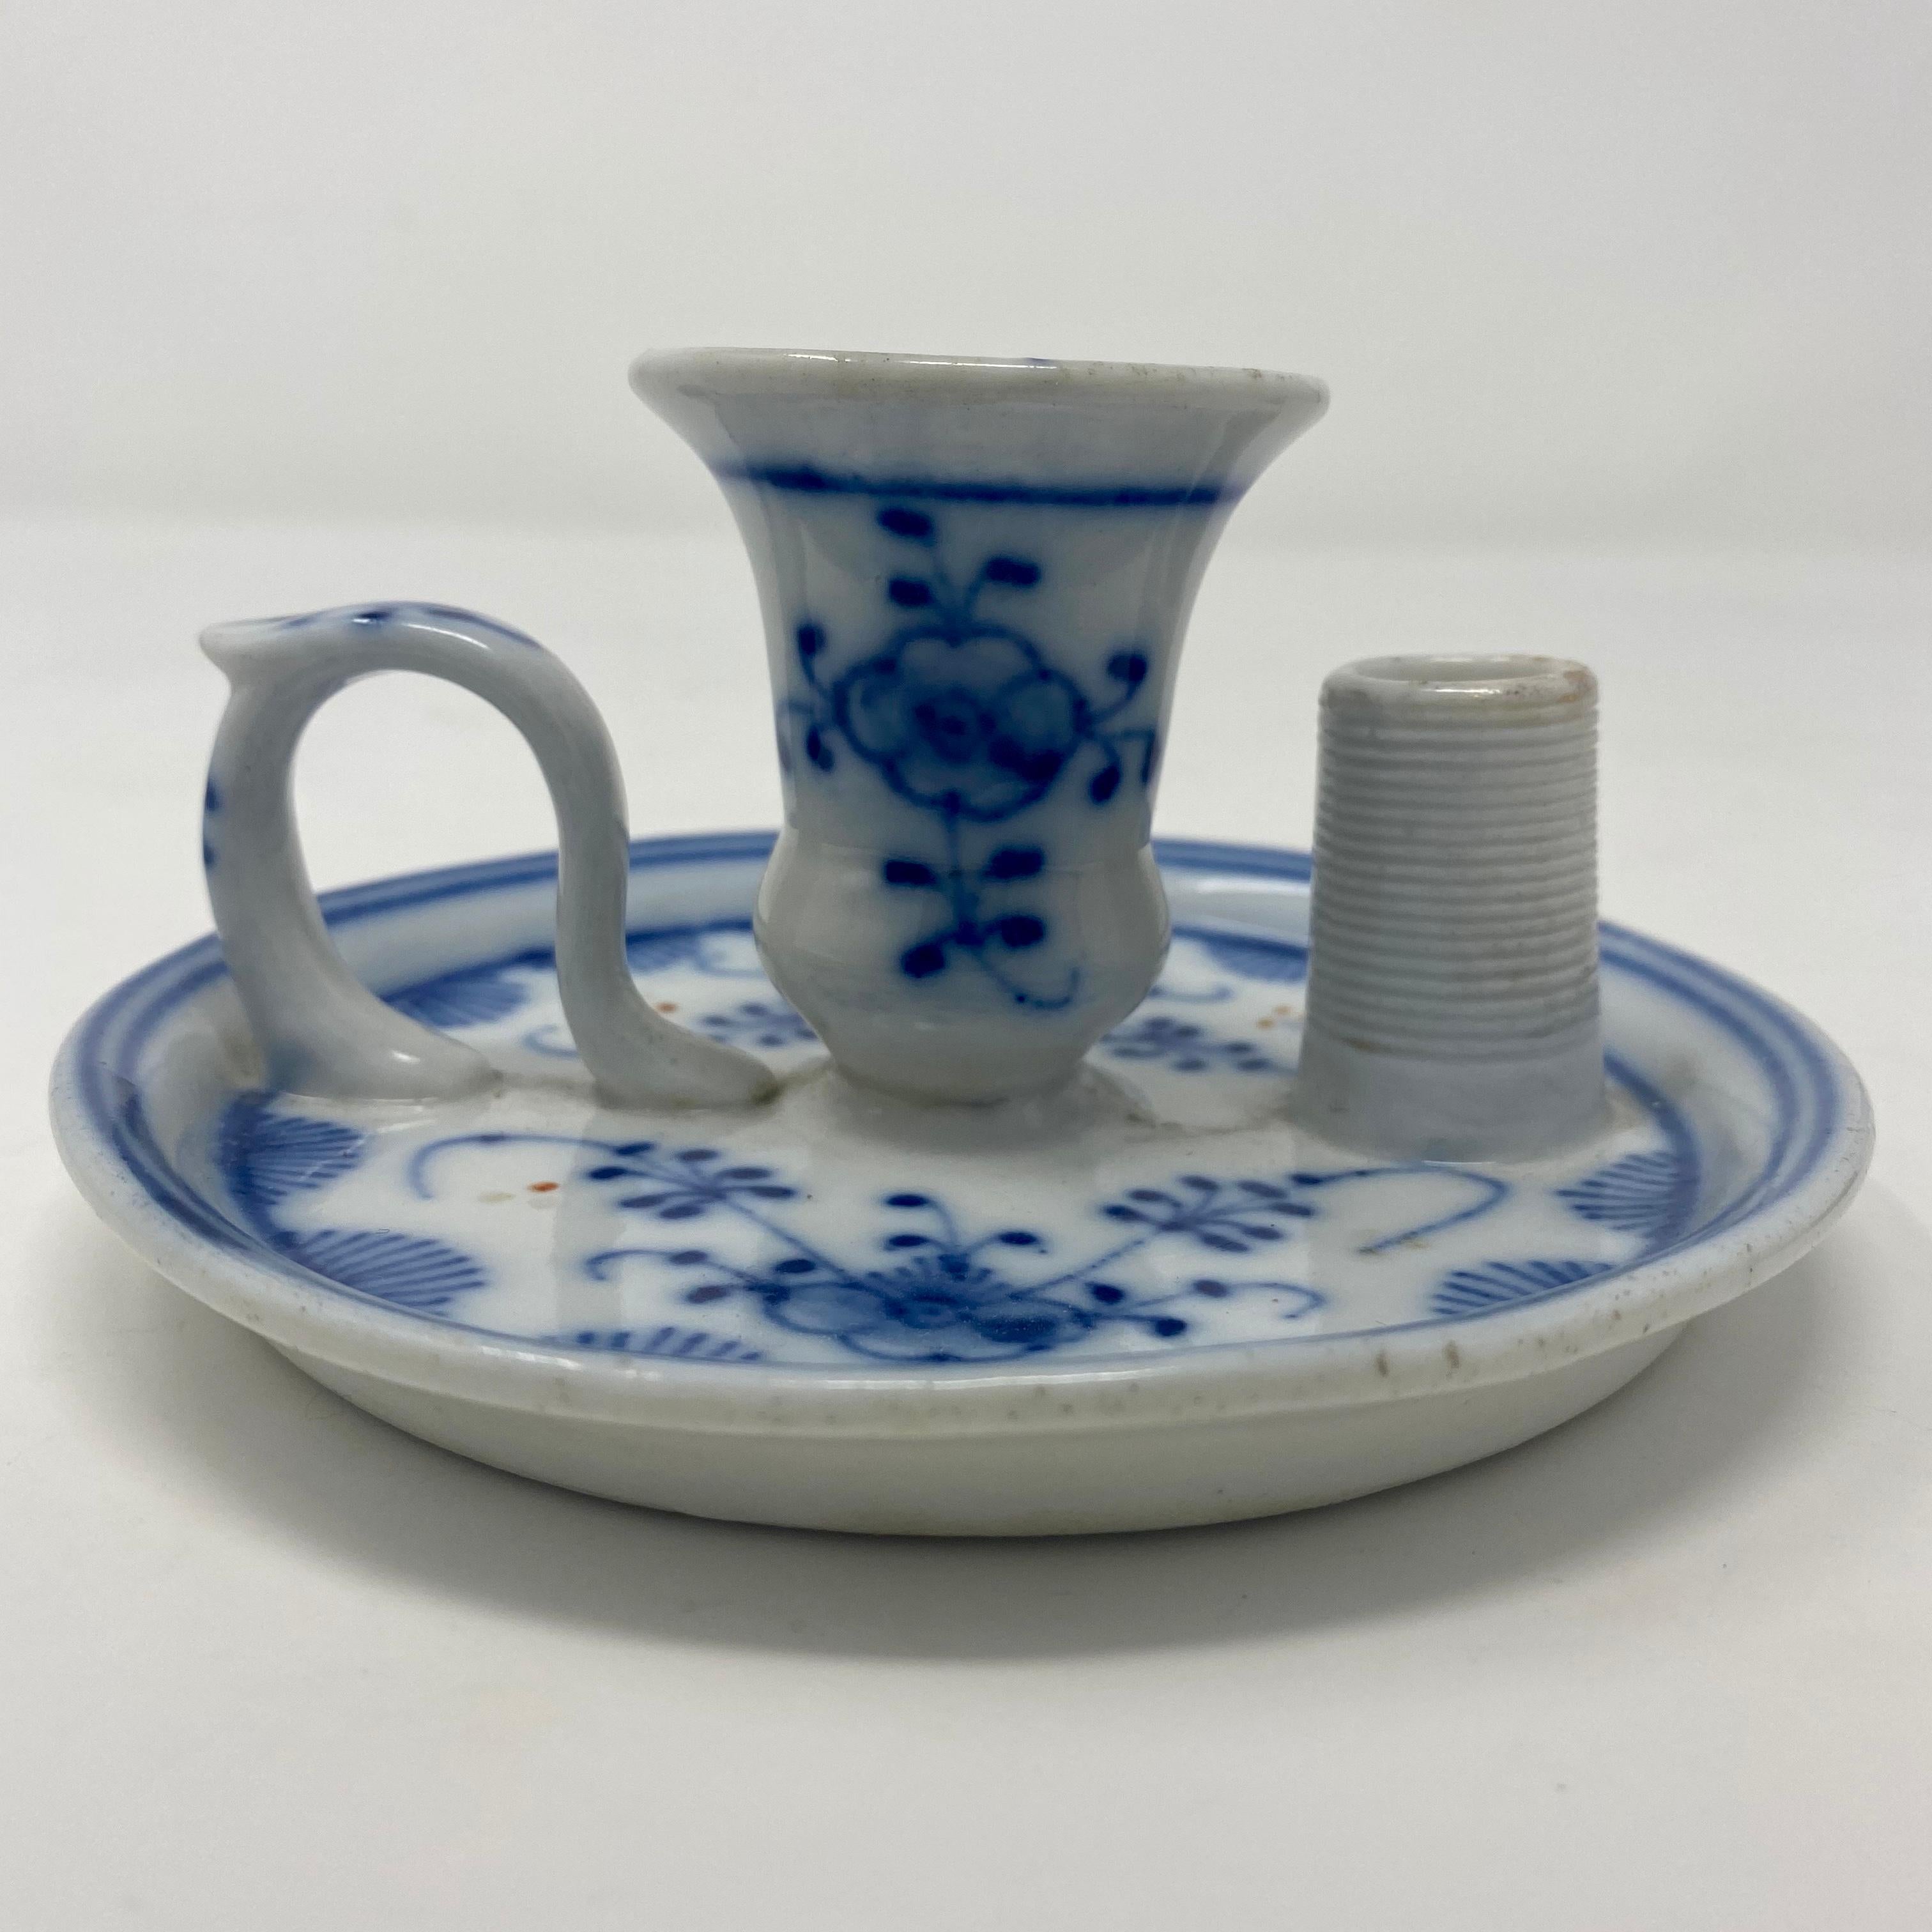 Antique 19th century Dresden blue and white porcelain chamber stick candleholder with match holder and striker.